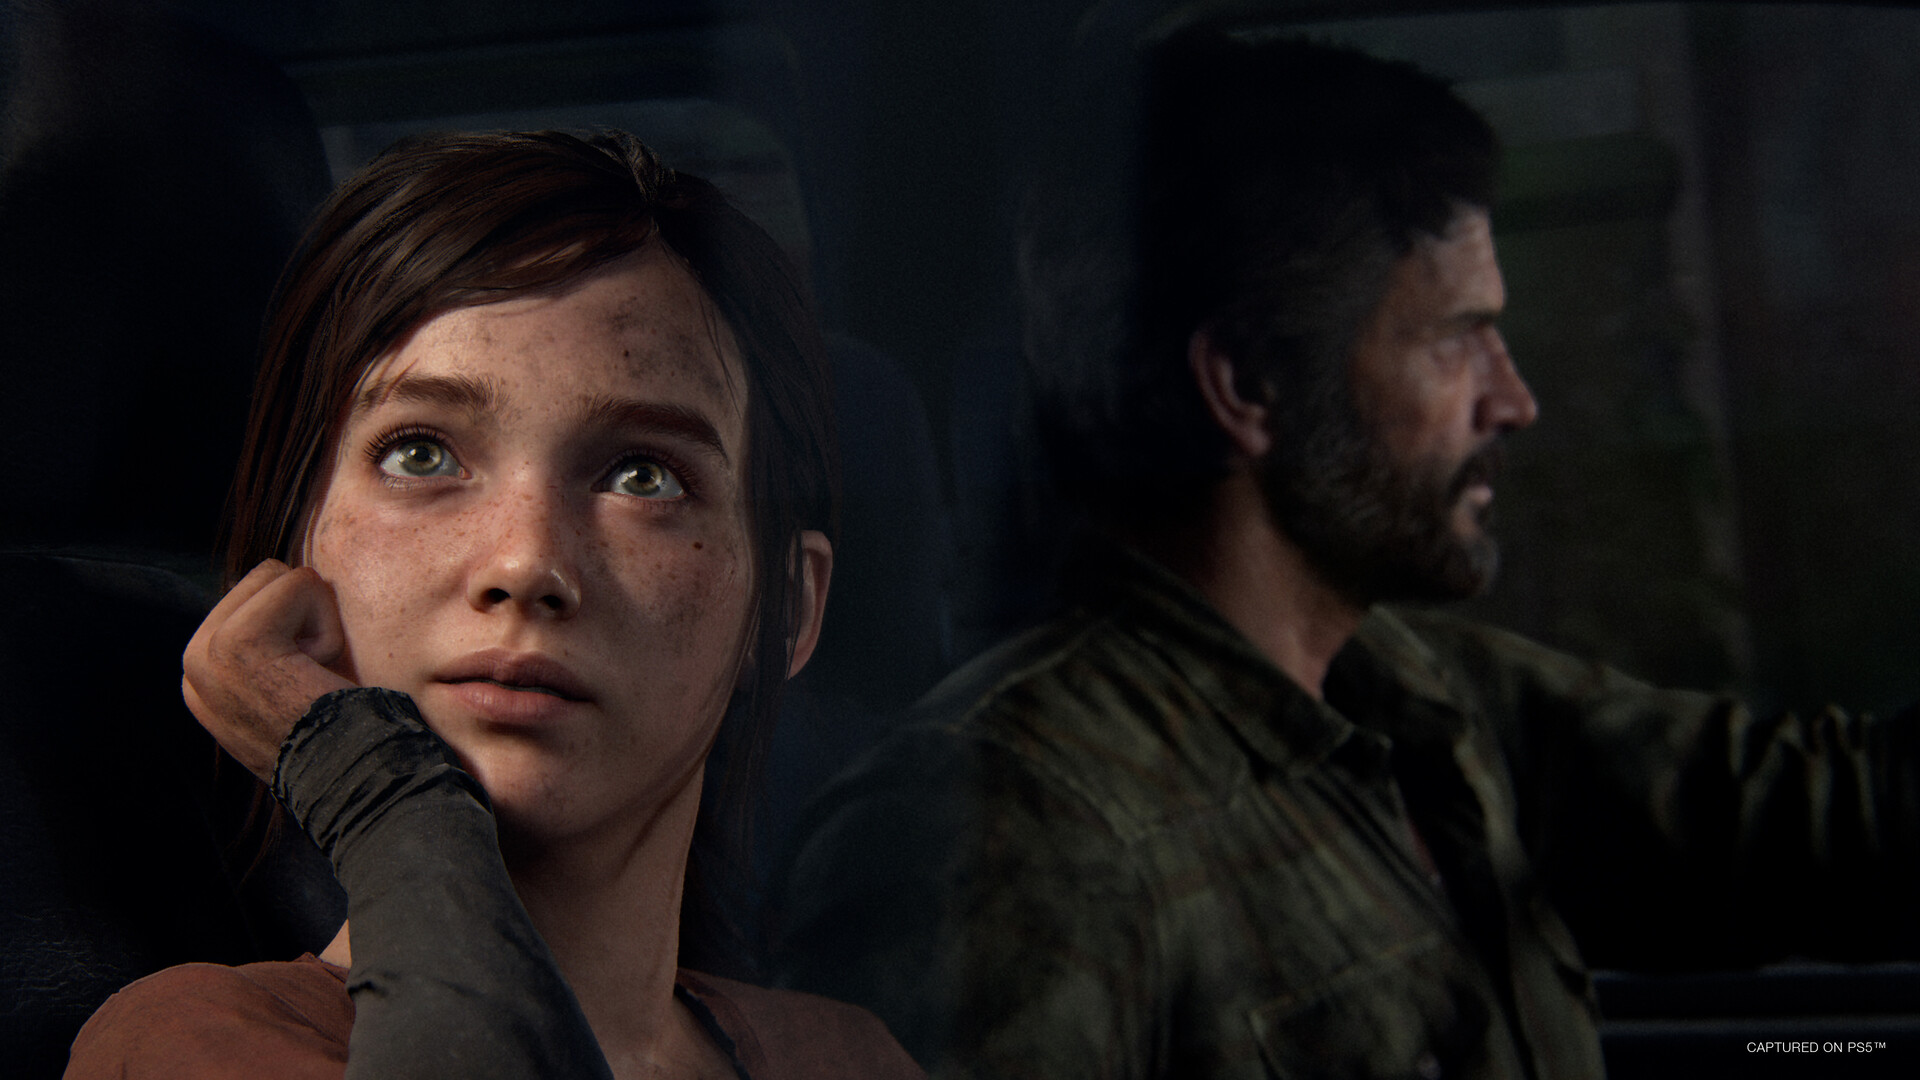 The Last of Us Part 1 is delayed because everyone likes the HBO show so much